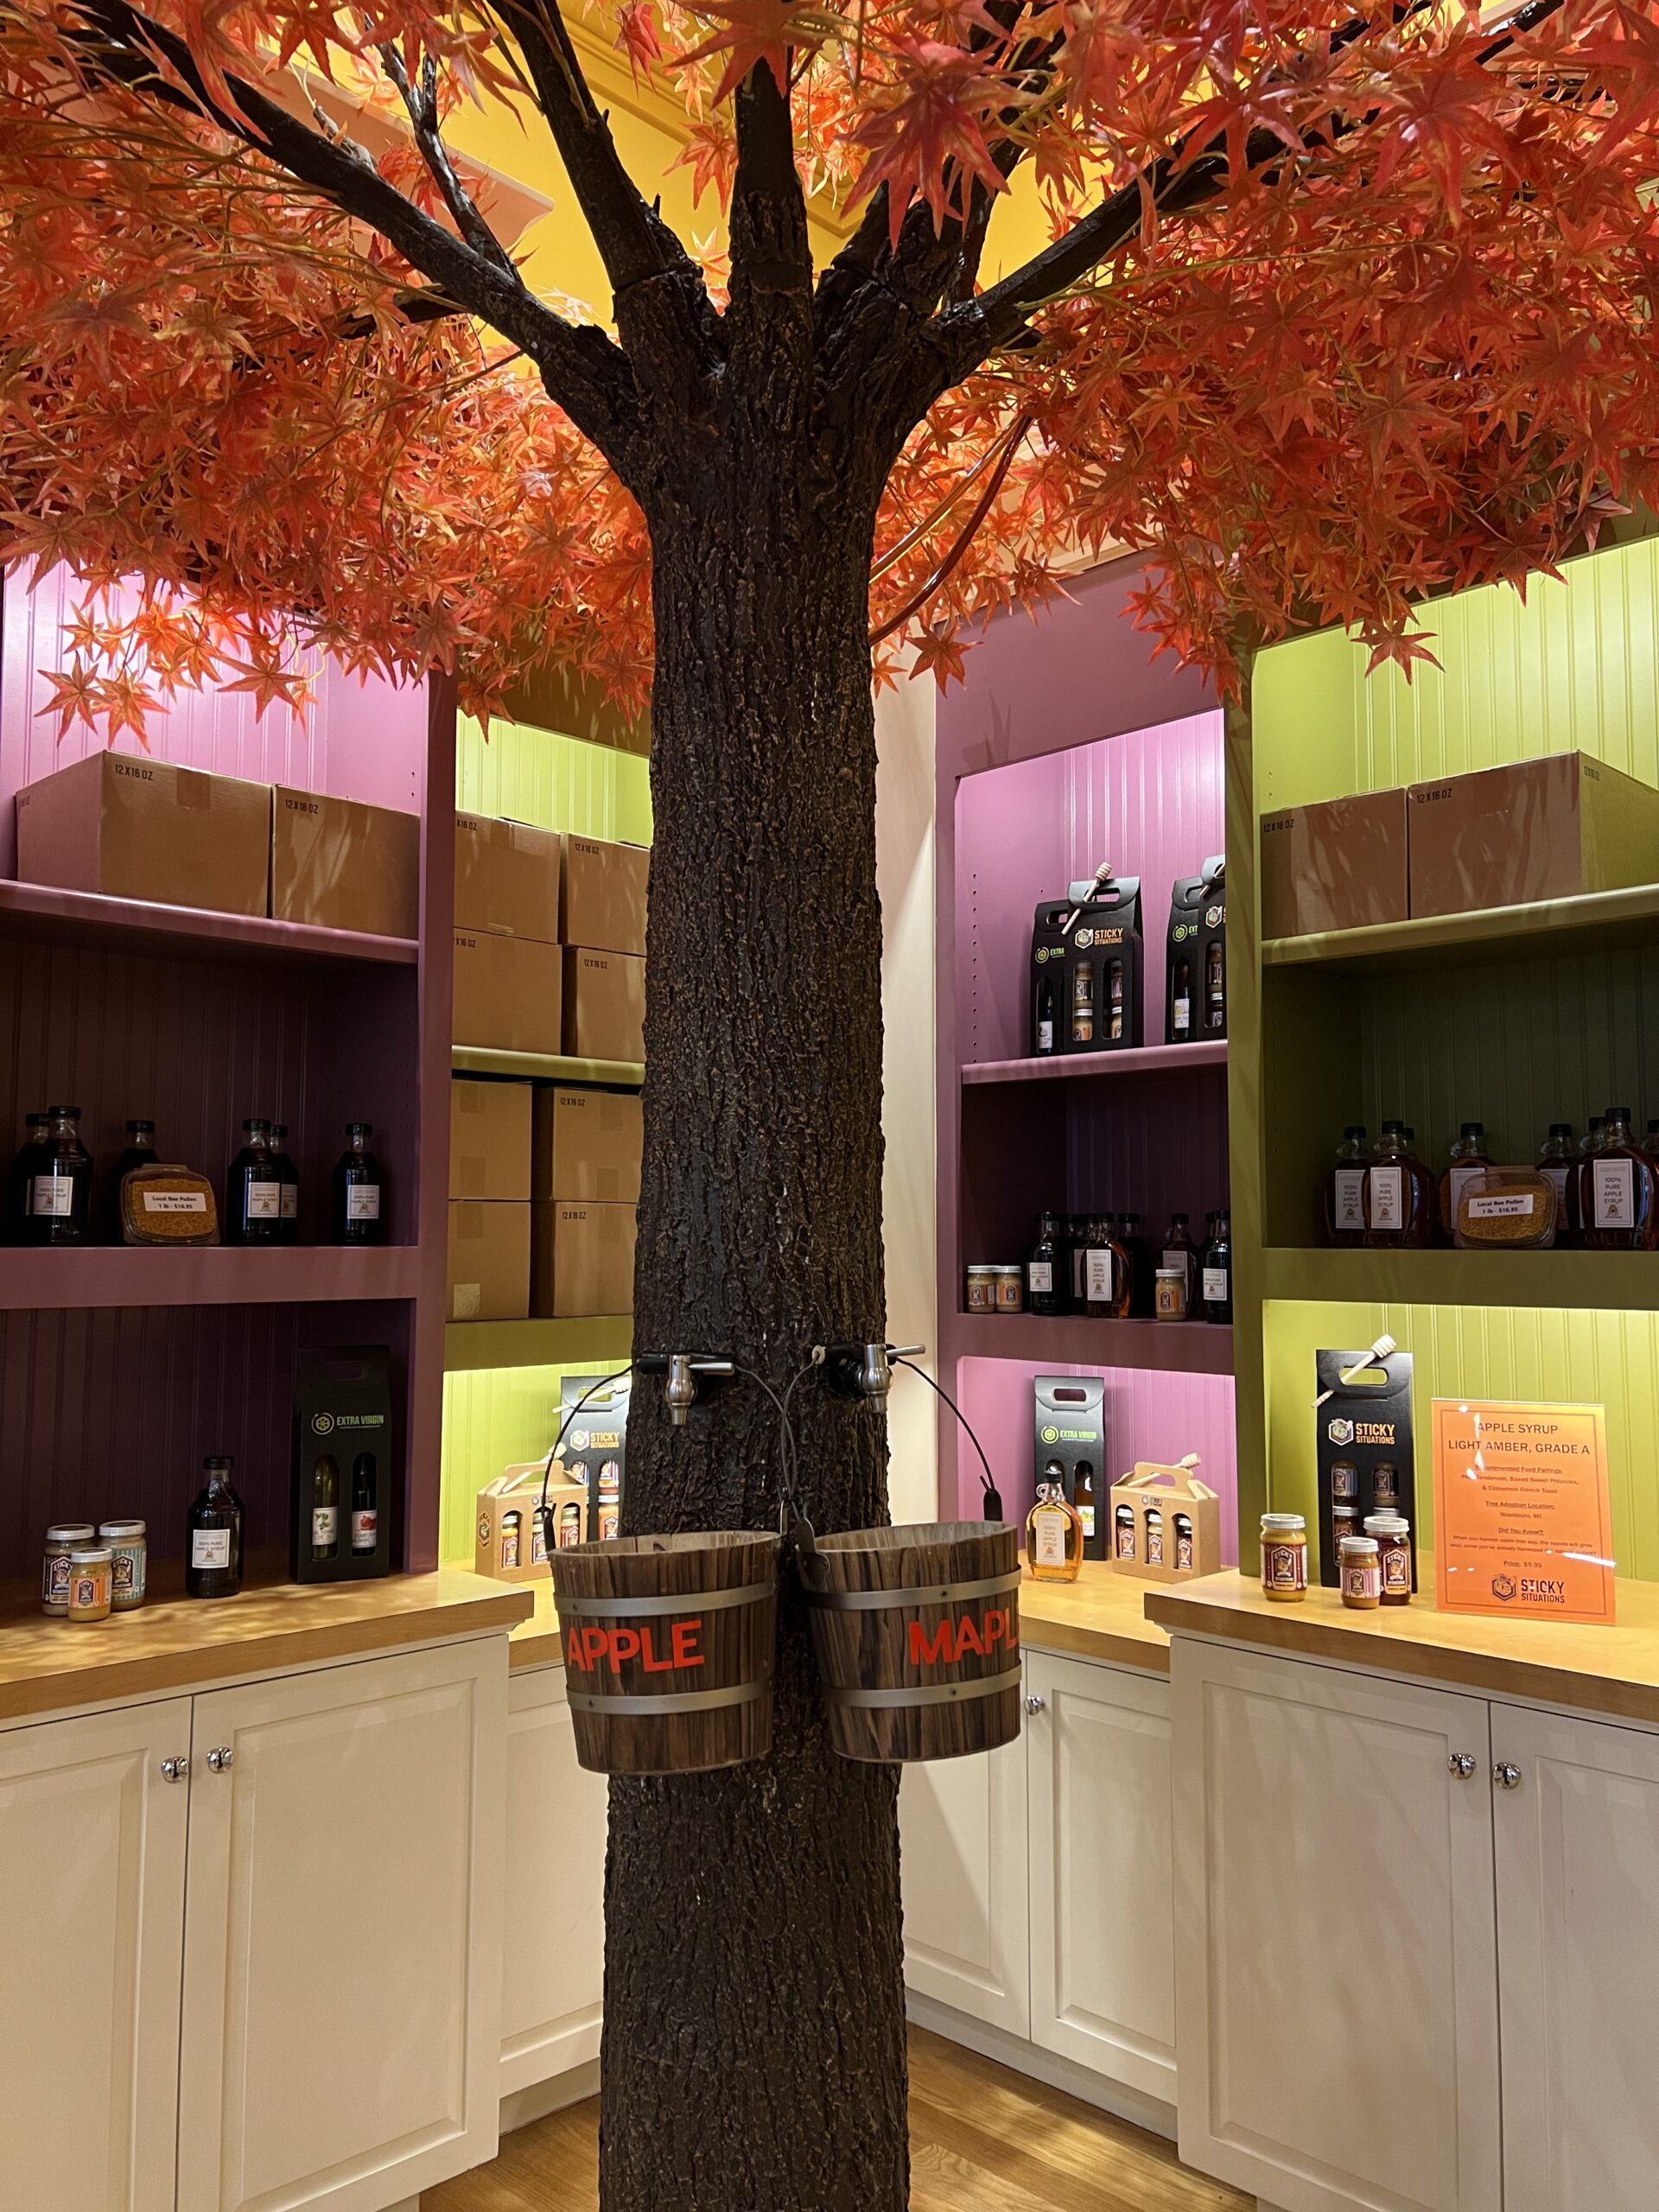 Sticky situations - store in national harbor - maple tree with buckets for sampling